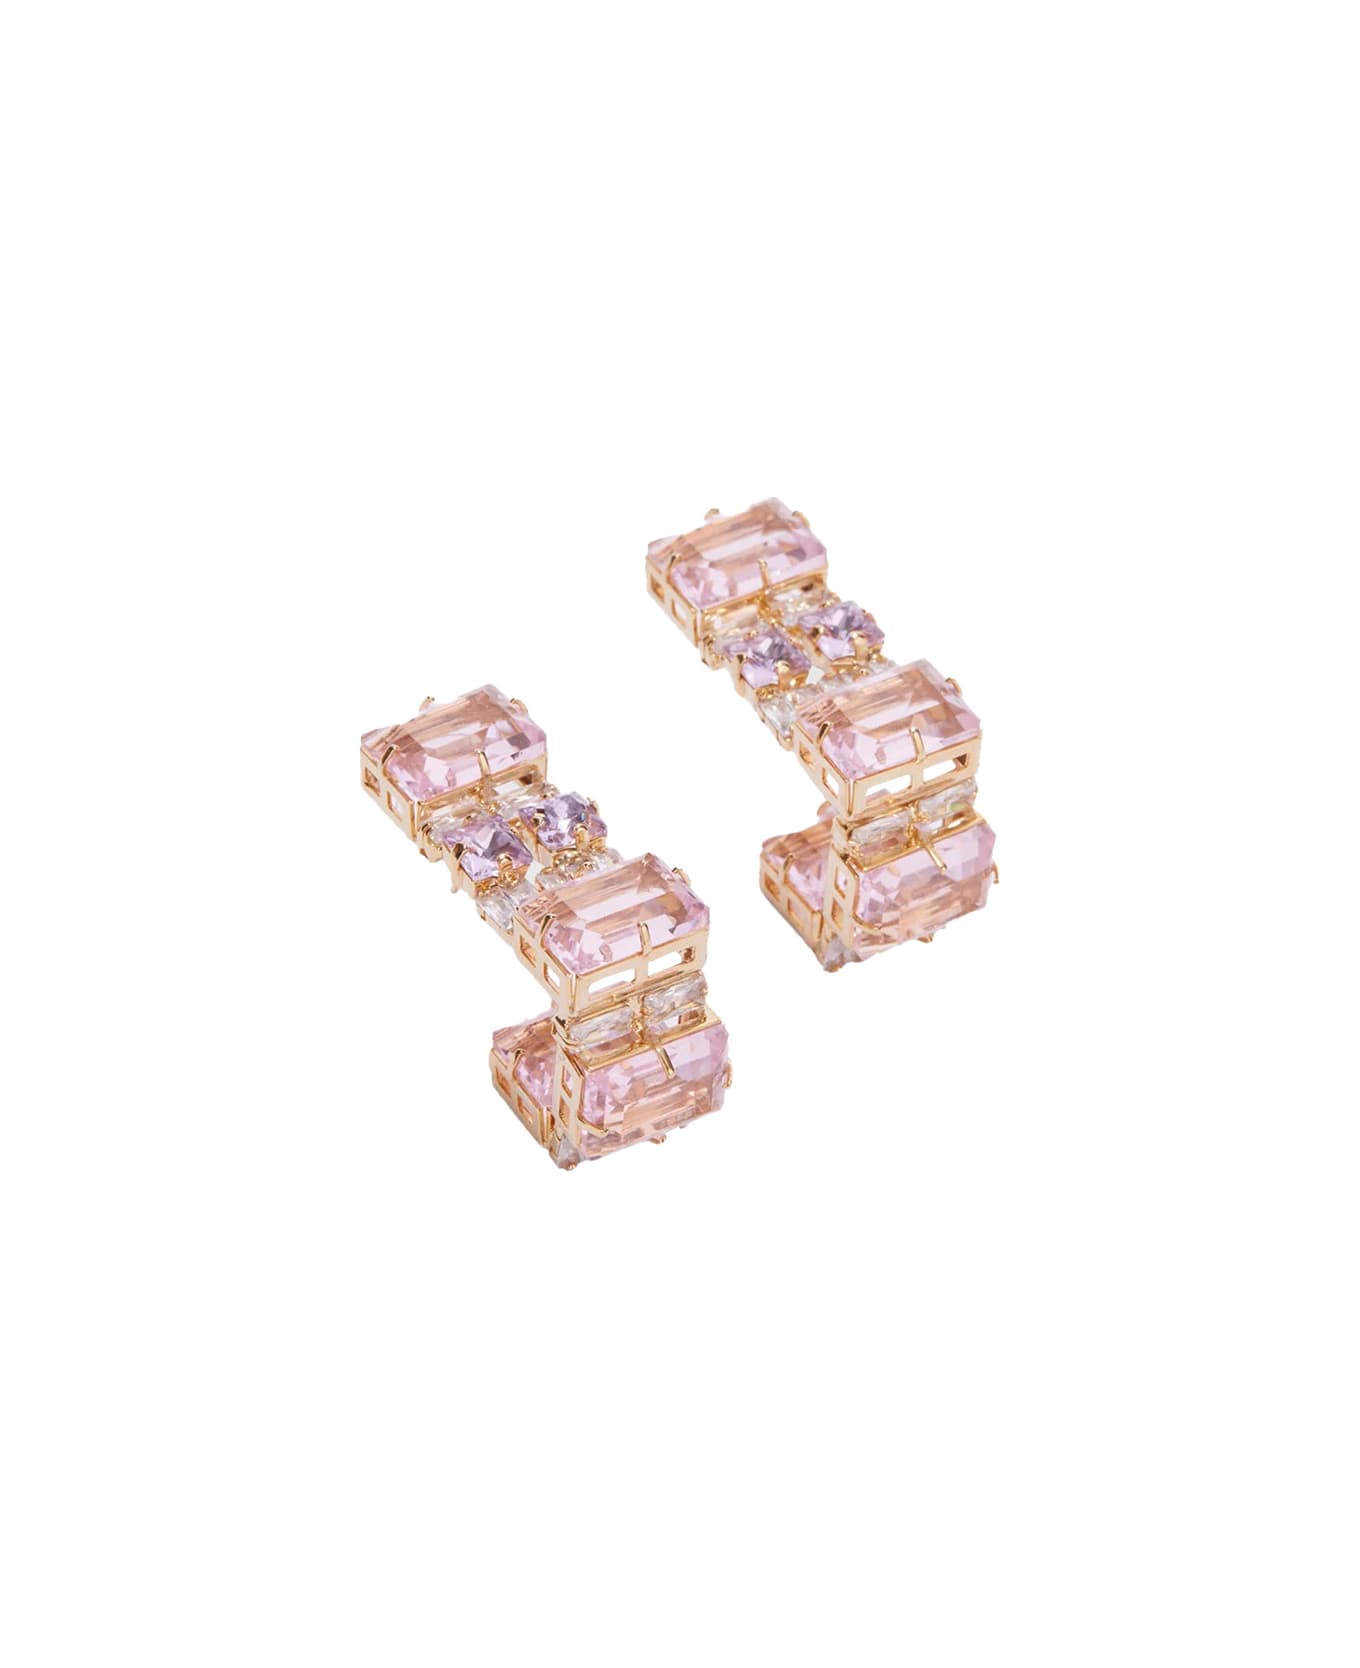 Ermanno Scervino Earrings With Pink Stones - Pink